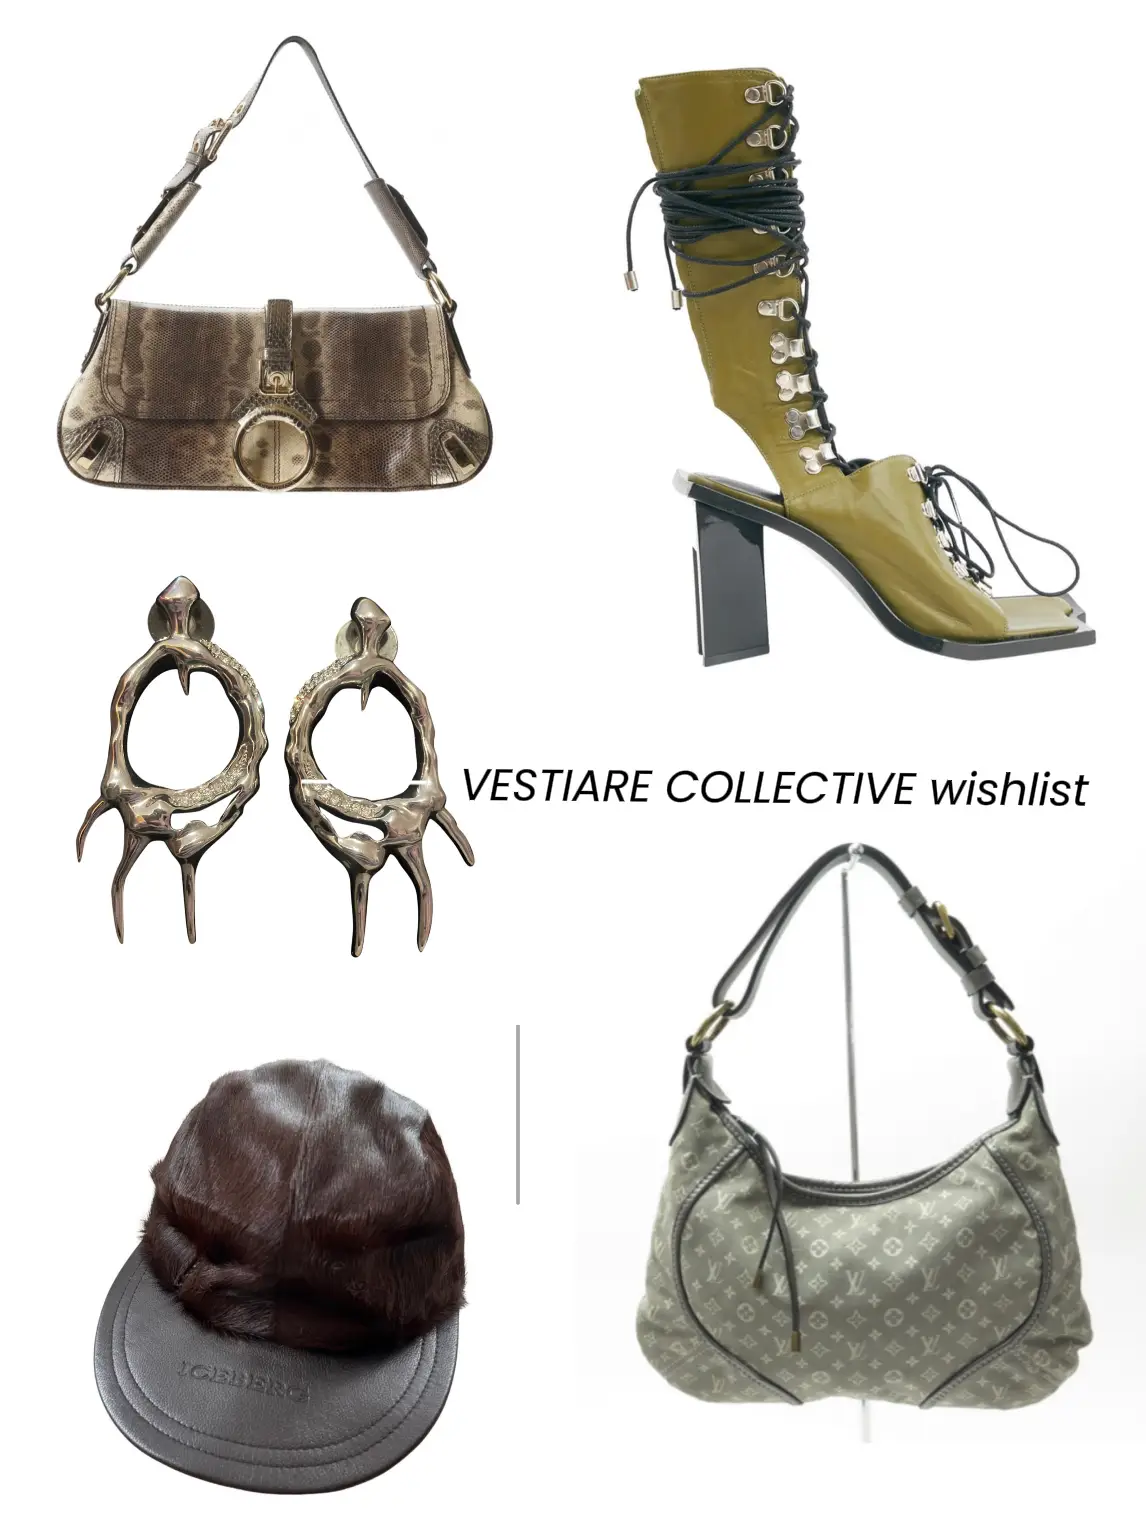 The 8 vintage bags on our Vestiaire Collective wish list